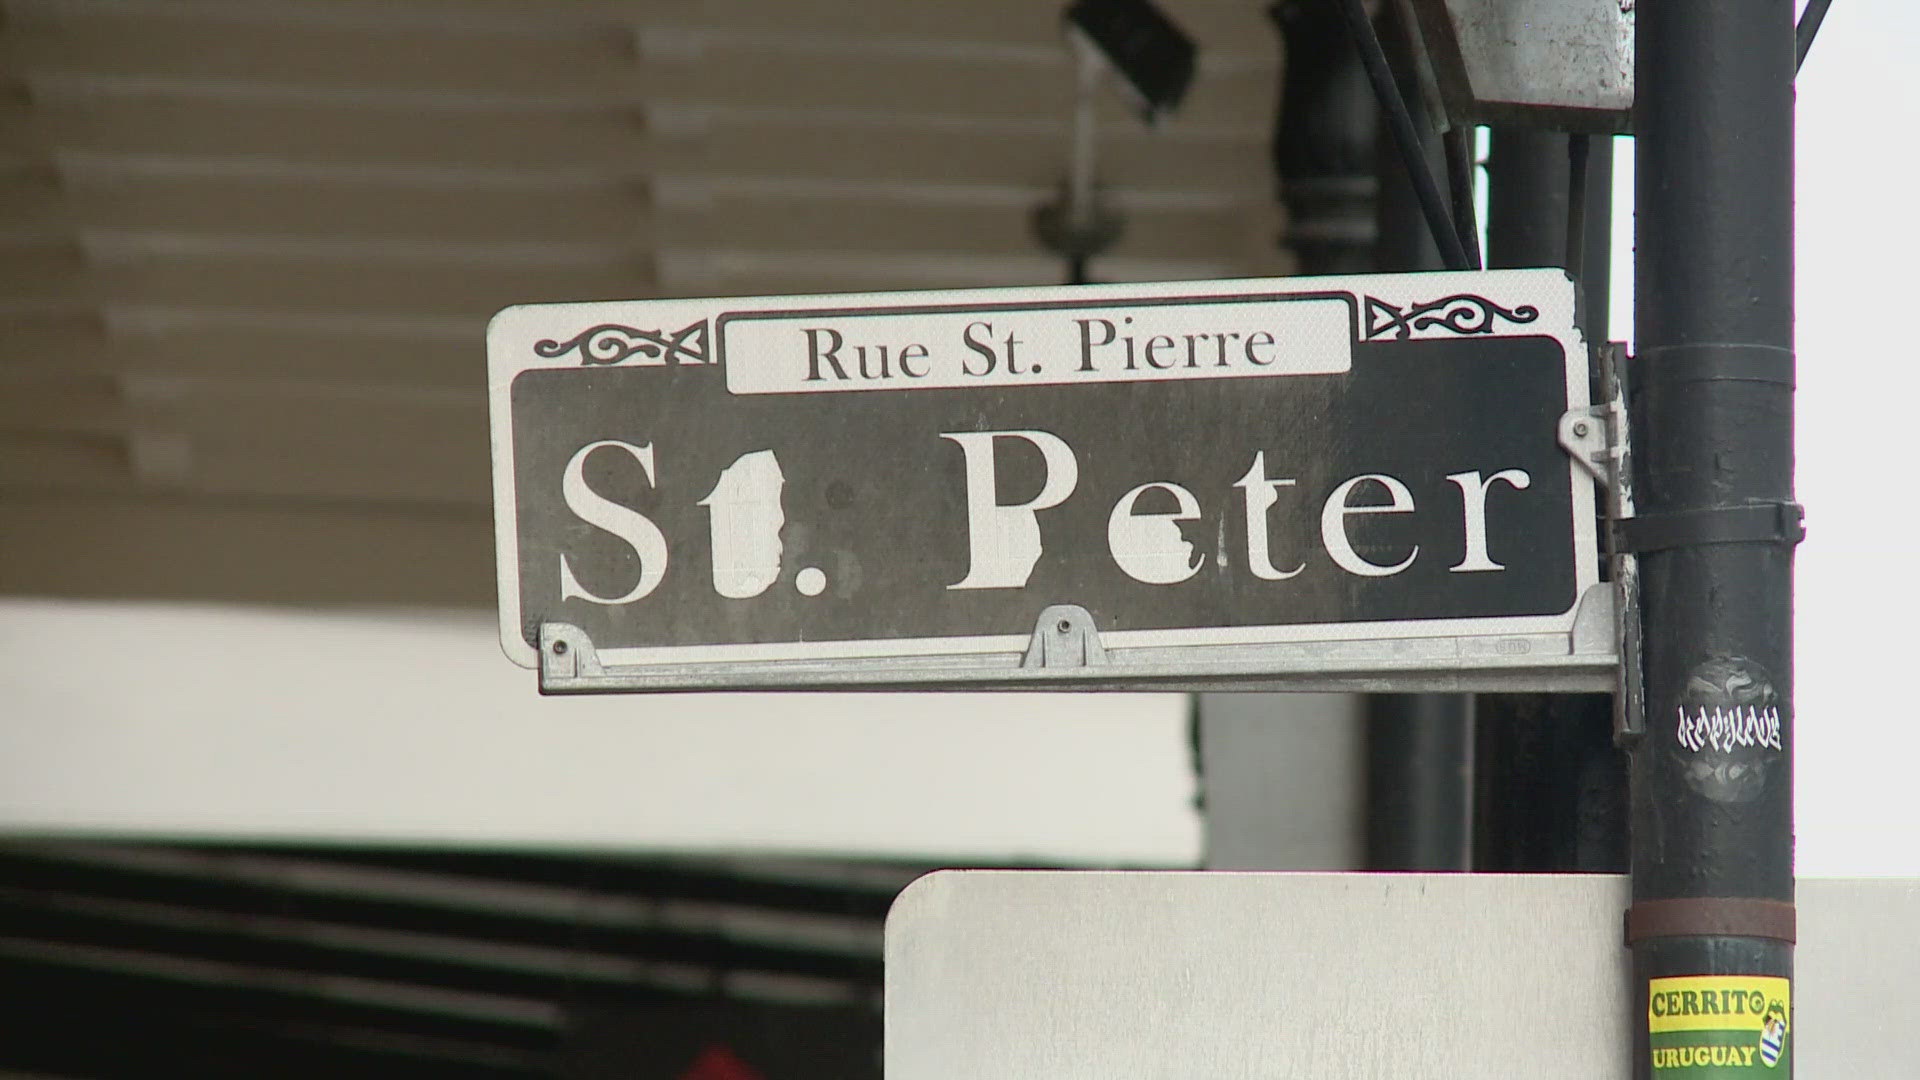 Police say it happened Sunday morning in the 700 block of St. Peter Street.